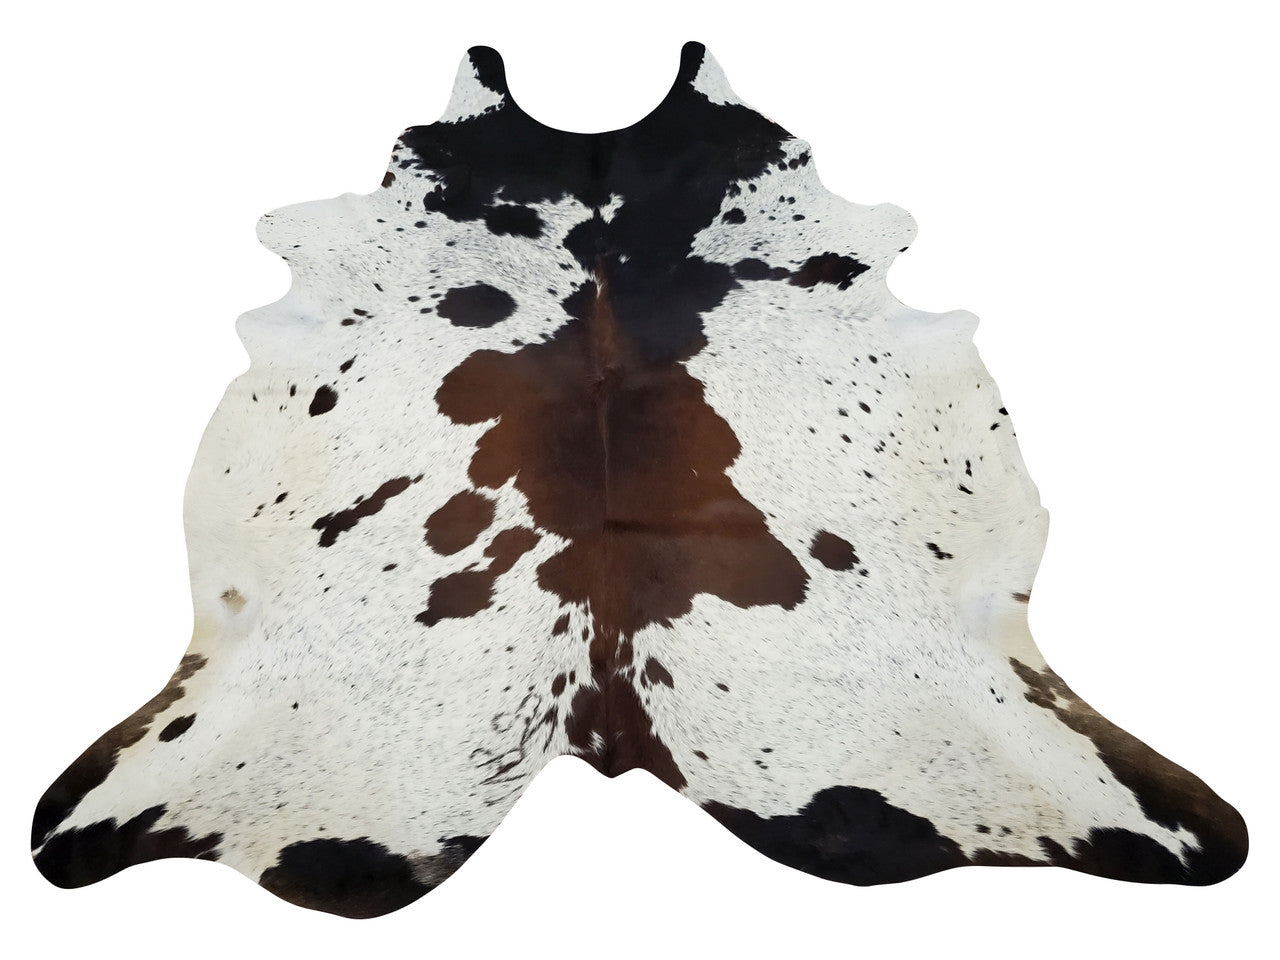 A large cowhide rug can bring a touch of luxury and exoticism to any room. This natural material is not only lovely to look at, but also soft and smooth to the touch. Handpicked for its unique pattern and premium quality, a cowhide rug is an investment that will last for years to come.